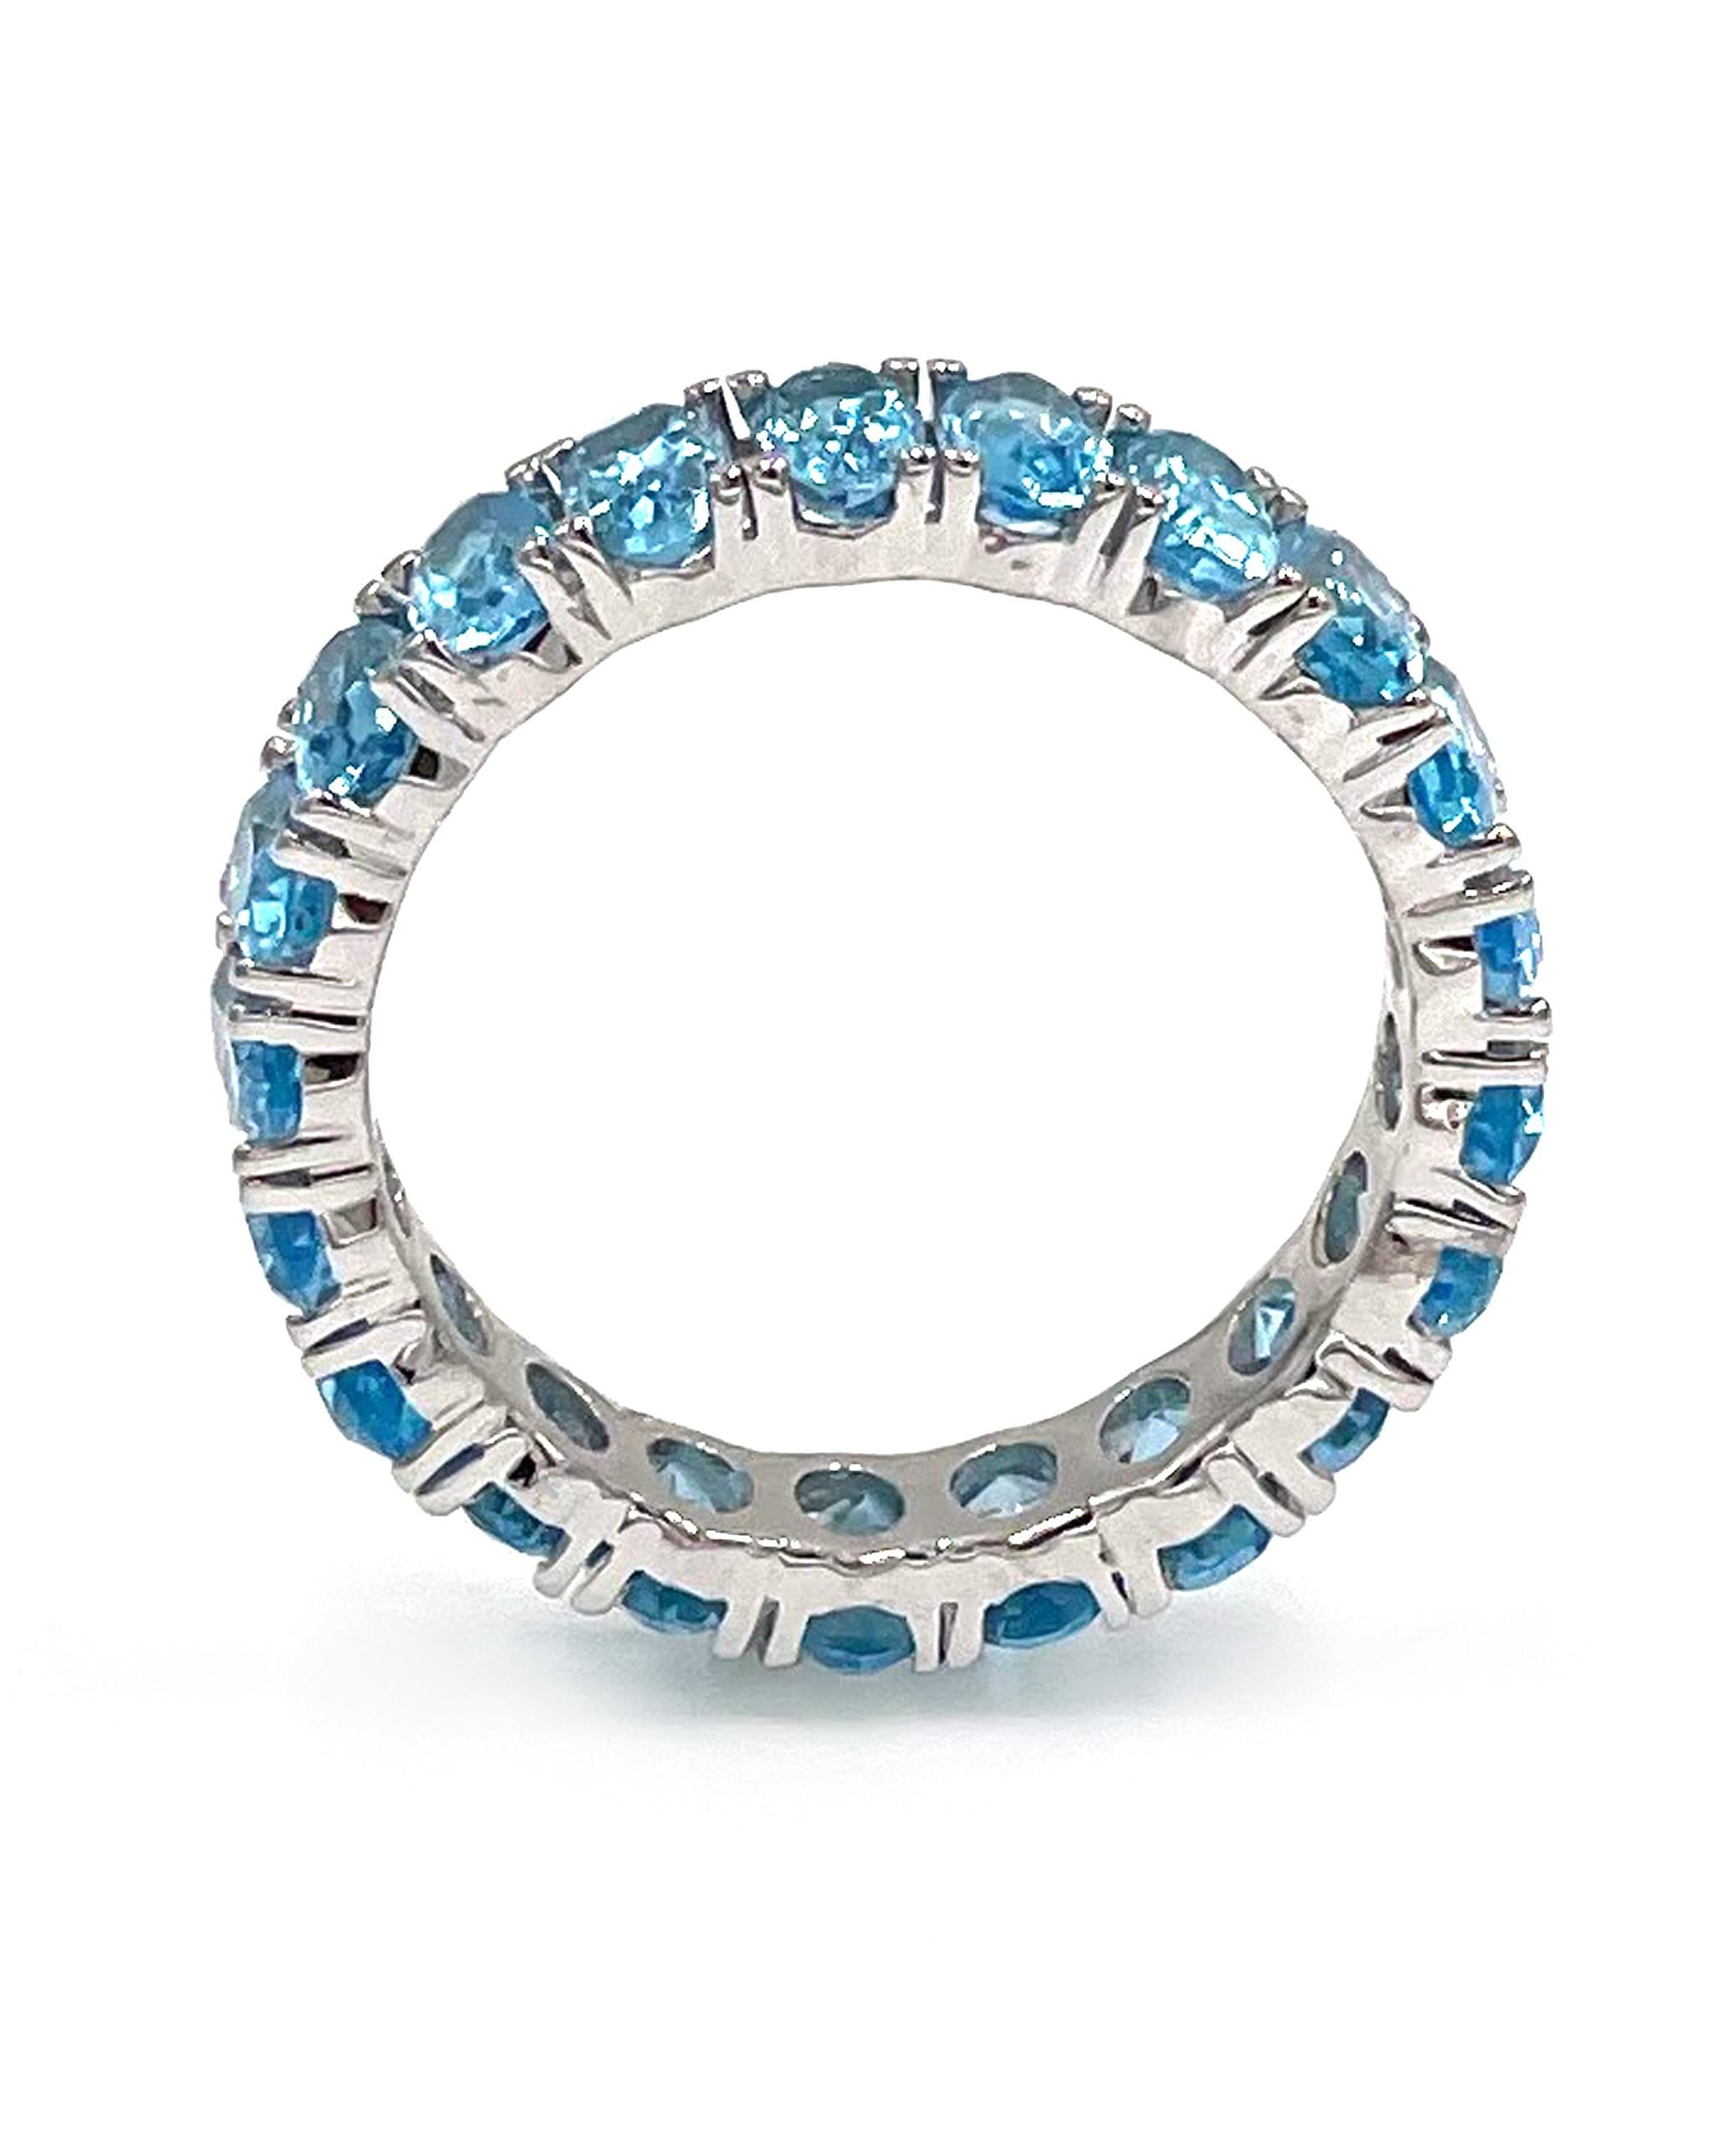 Contemporary 14K White Gold Oval Shape Sky Blue Topaz Eternity Ring - 5.51 carats For Sale